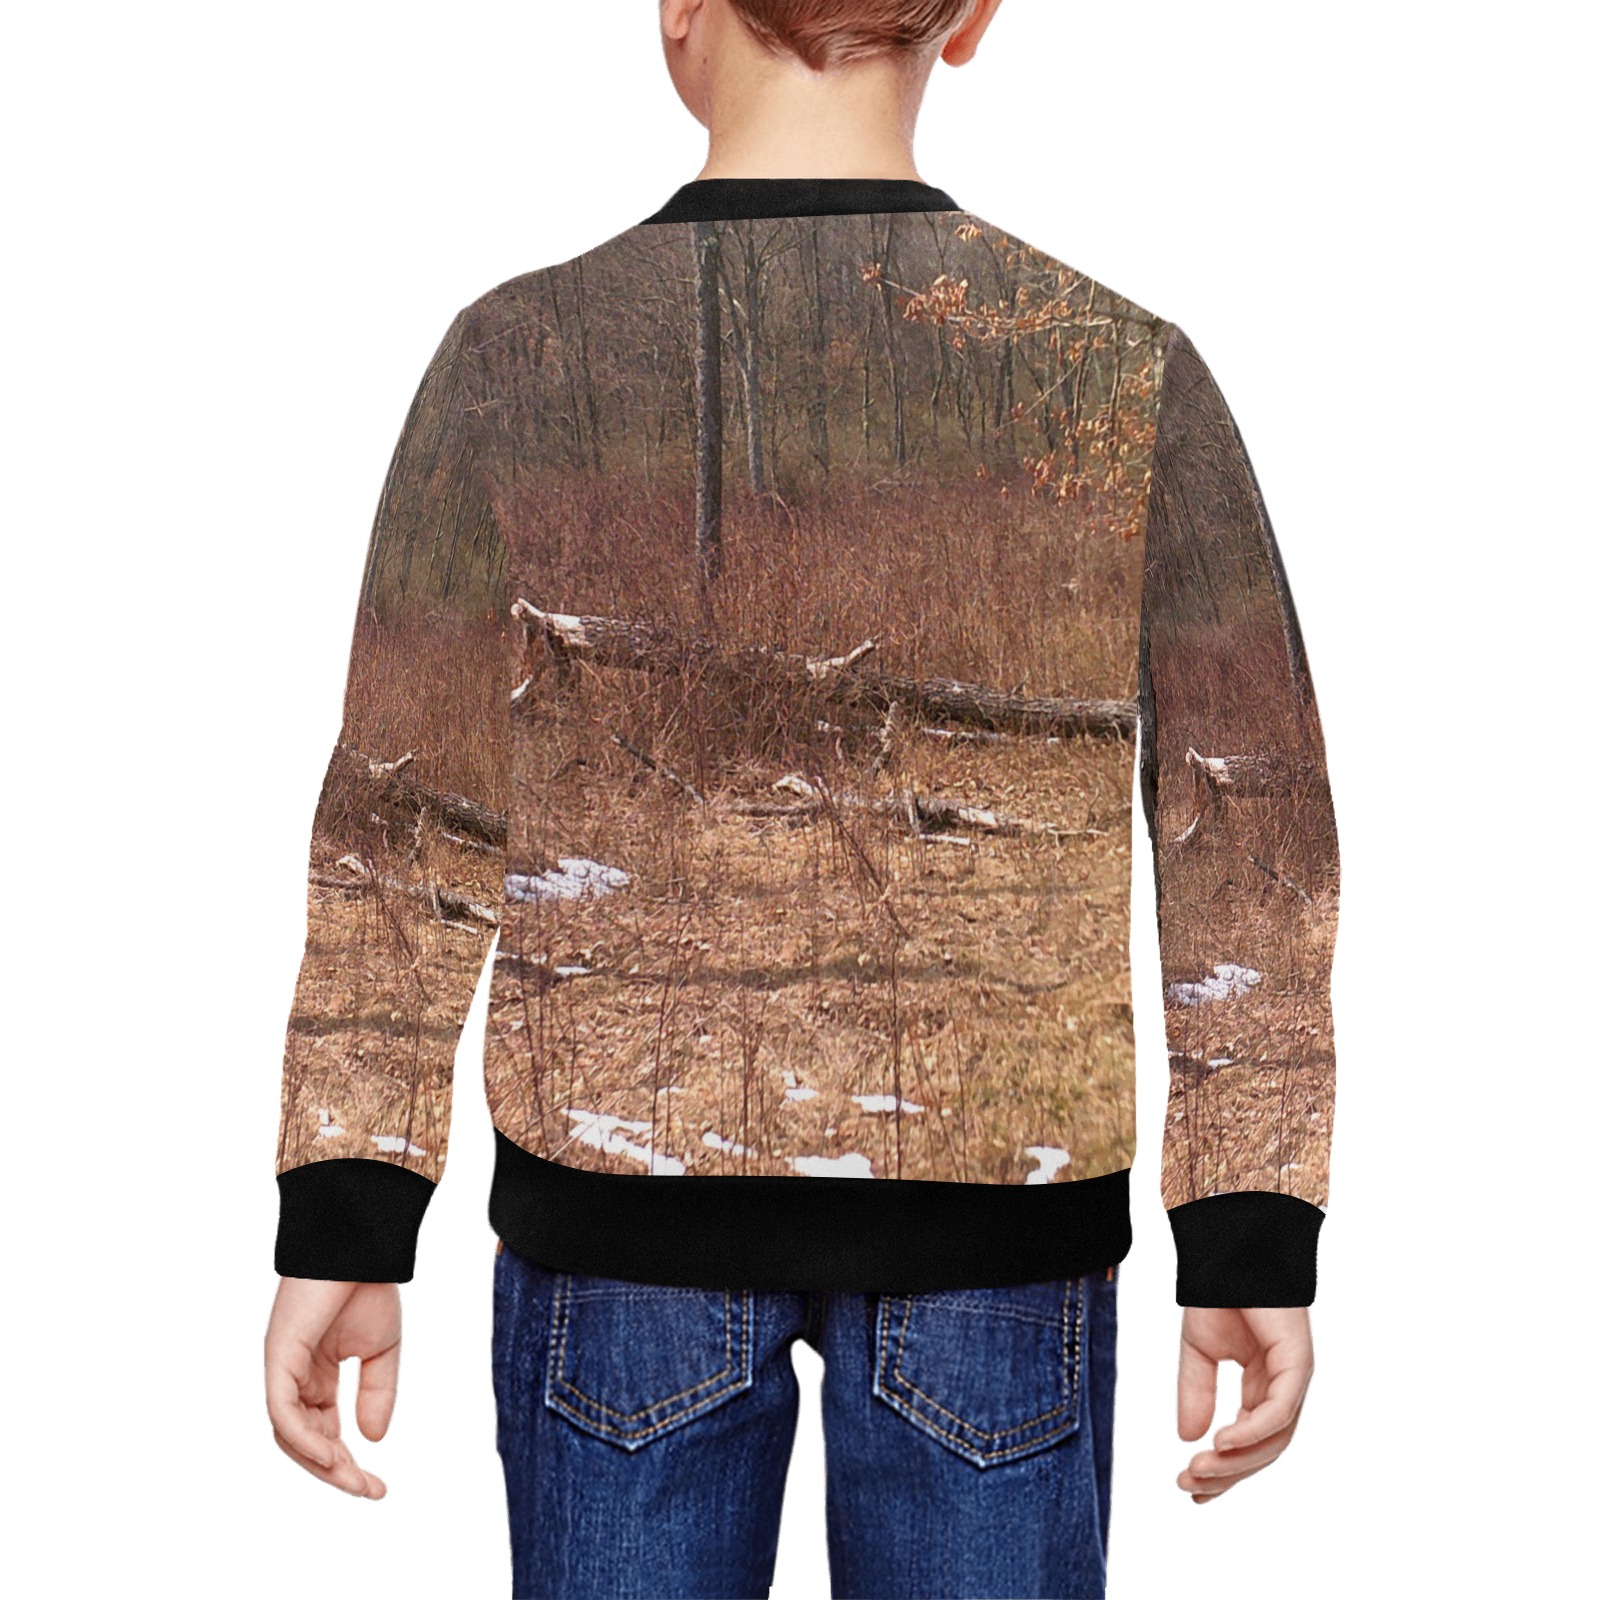 Falling tree in the woods All Over Print Crewneck Sweatshirt for Kids (Model H29)